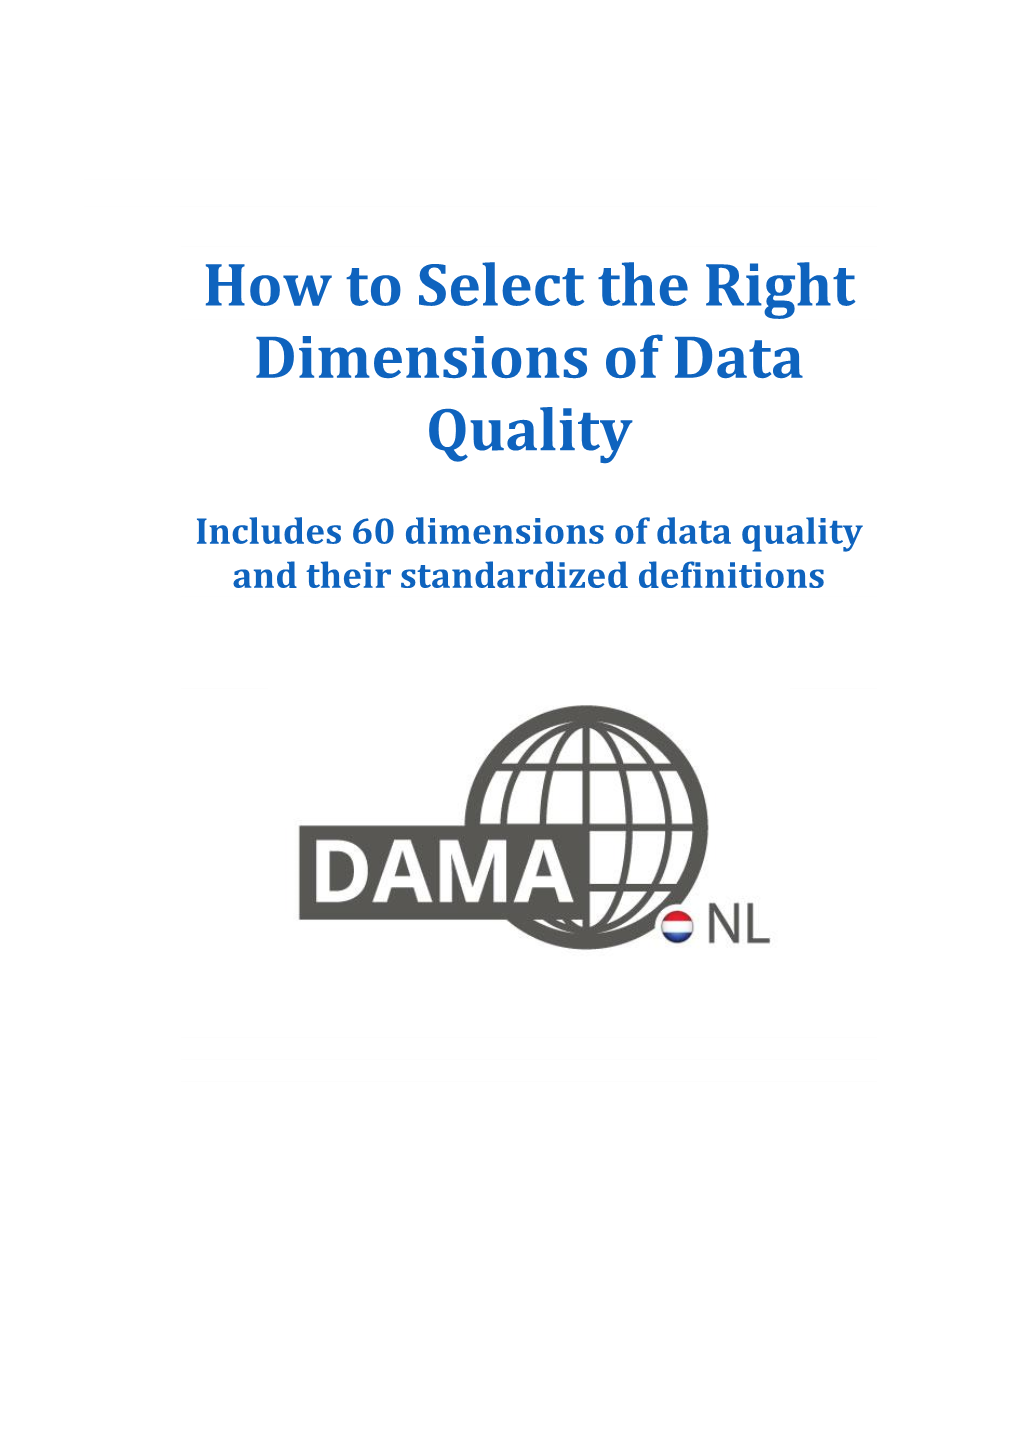 How to Select the Right Dimensions of Data Quality